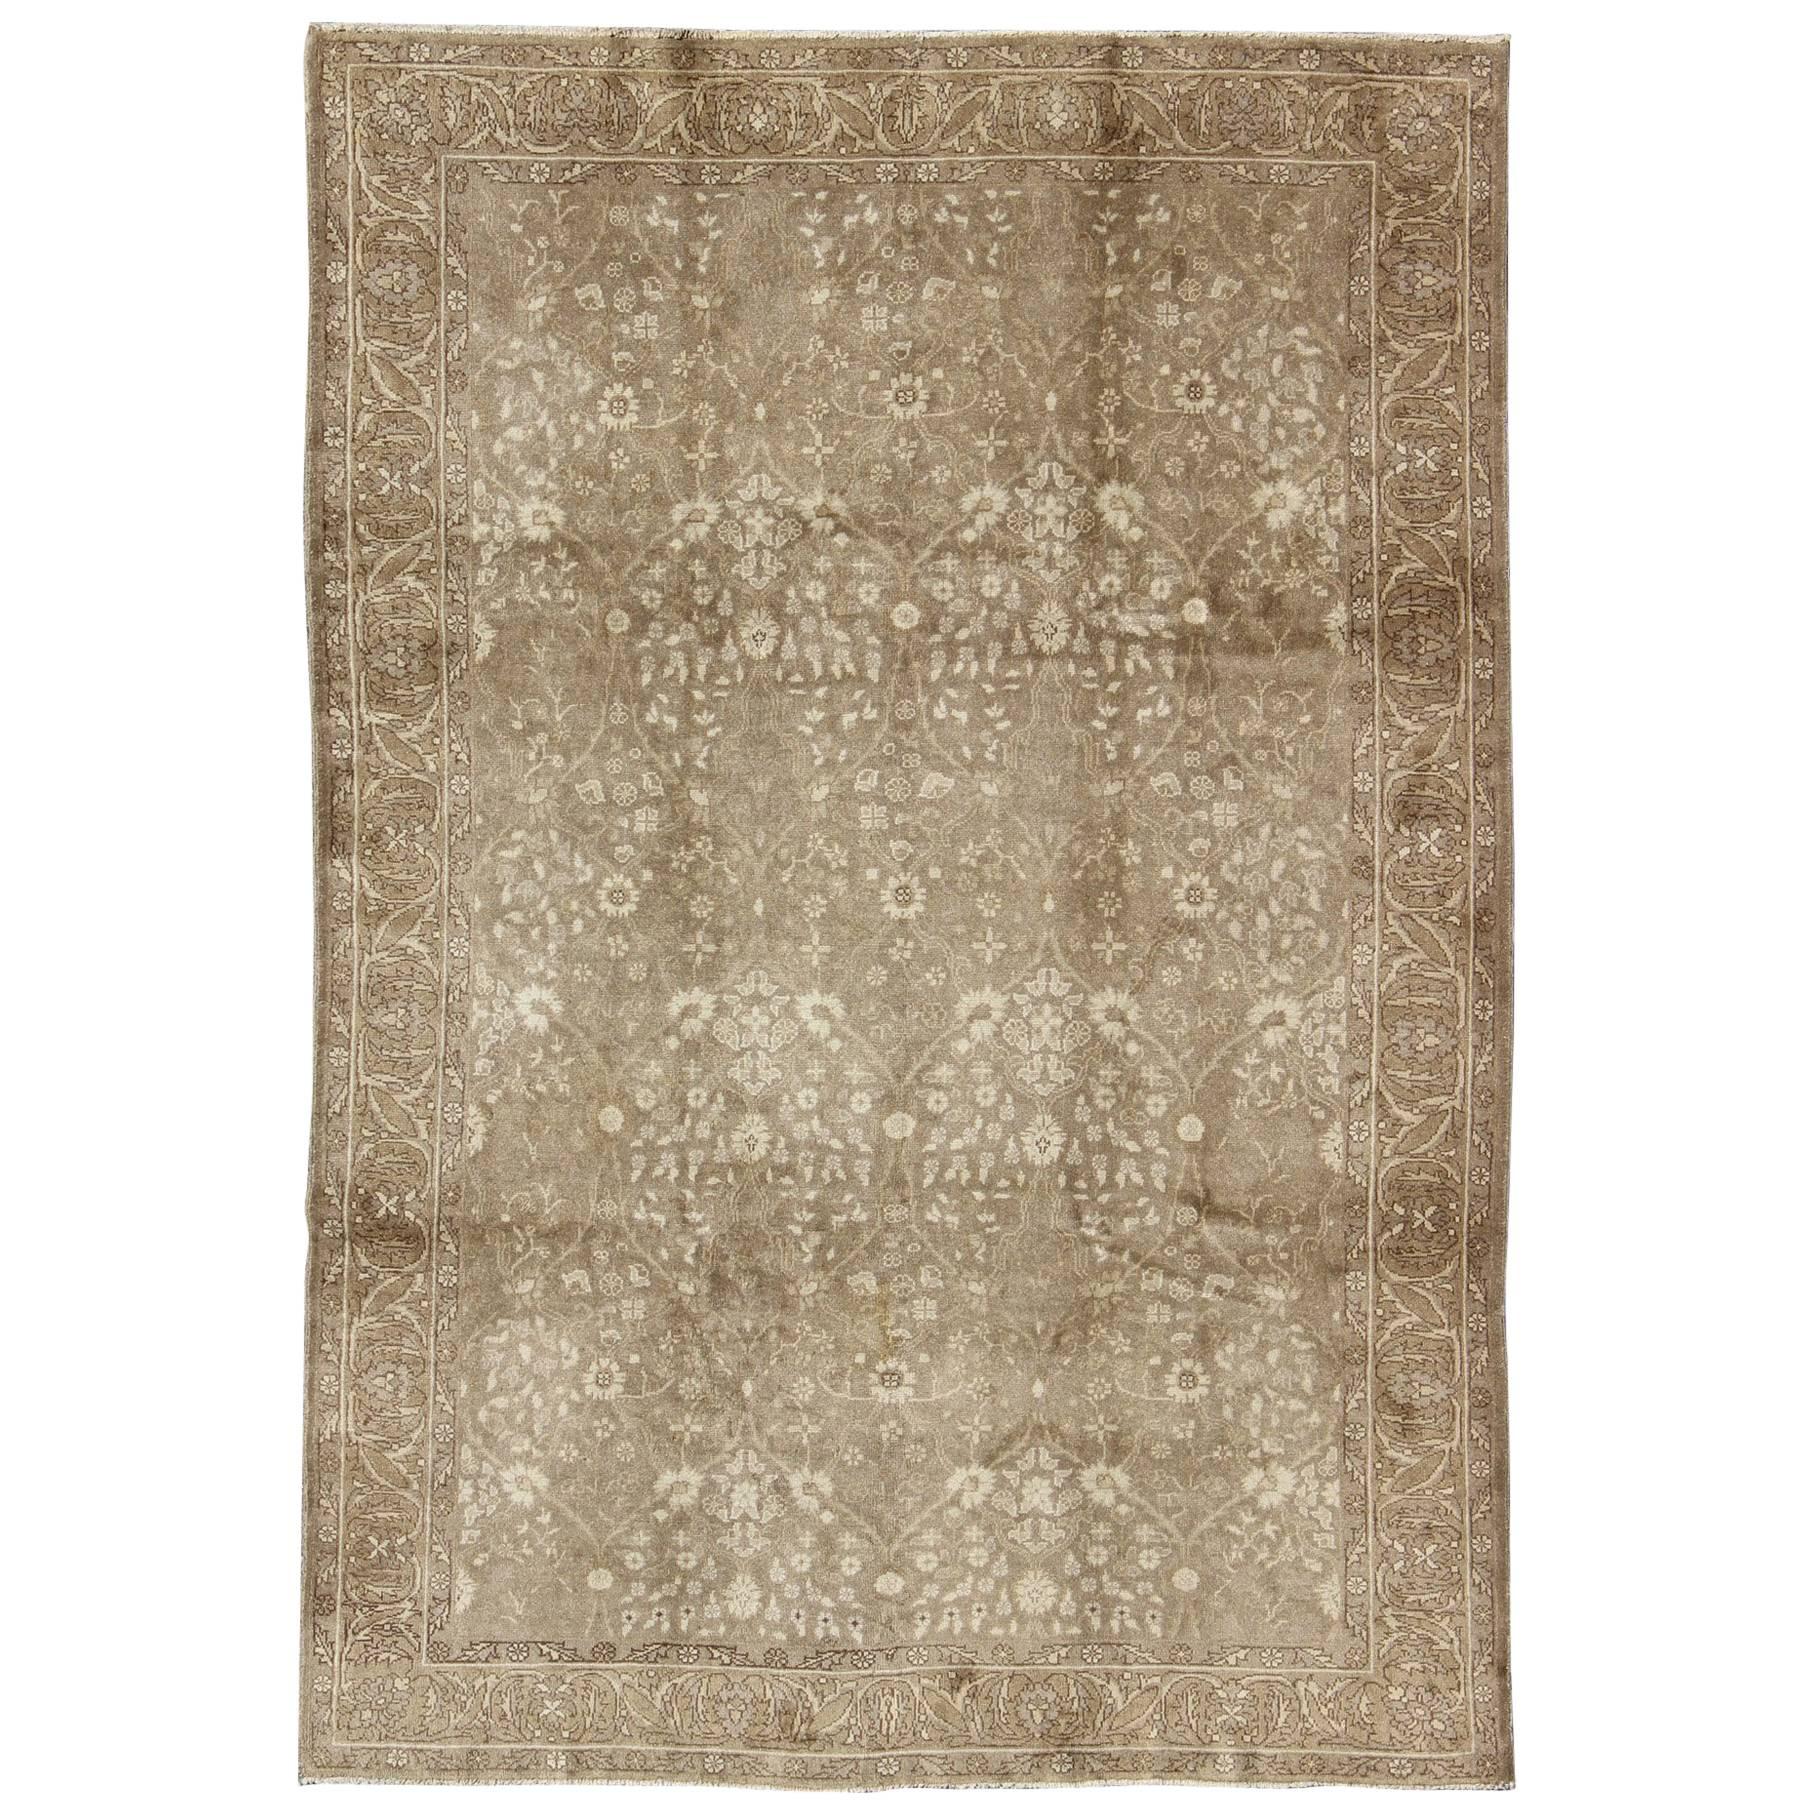 Midcentury Vintage Turkish Oushak Rug with All-Over Botanical Pattern in Neutral